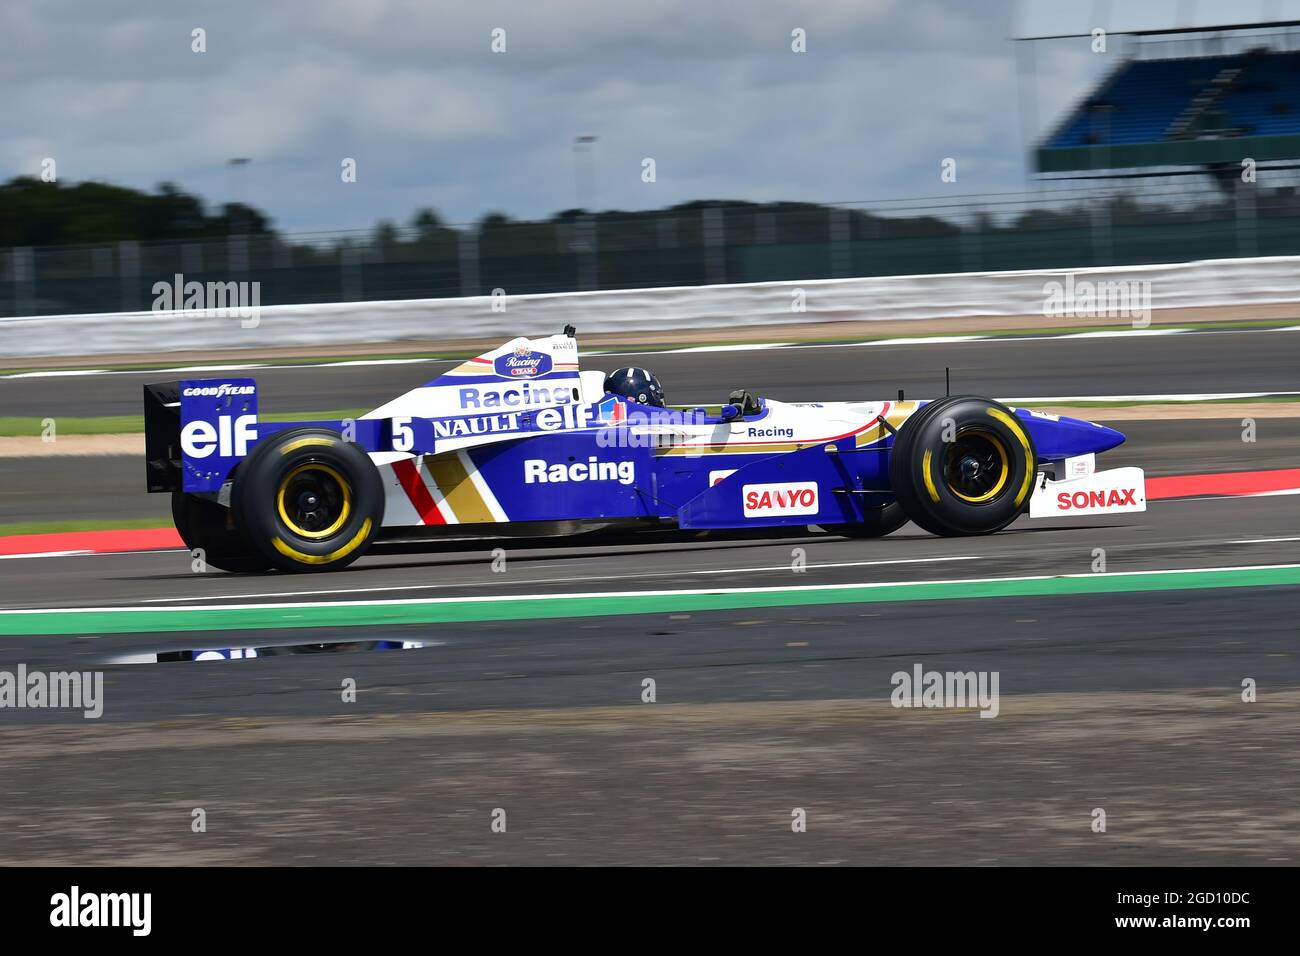 Damon Hill in the Williams FW18 that he won the 1996 F1 World Championship,  Silverstone Classic, Rocking and Racing, July - August 2021, Silverstone  Stock Photo - Alamy